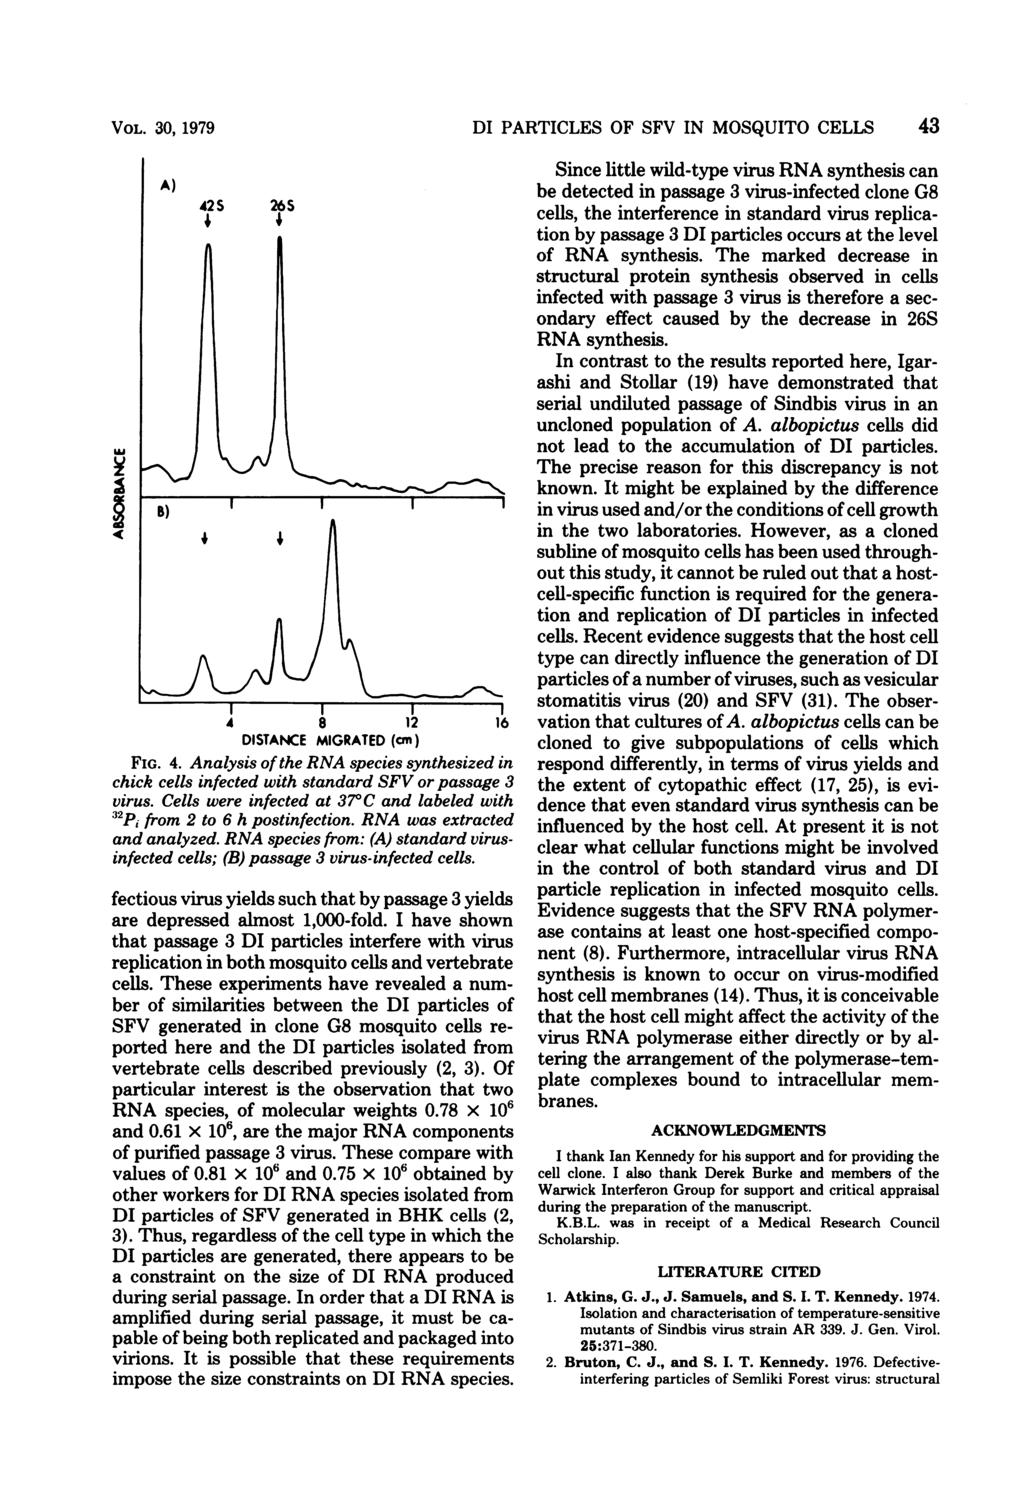 VOL. 30, 1979 A) 42S 4 4 26S DISTANCE MIGRATED (cm) FIG. 4. Analysis of the RNA species synthesized in chick cells infected with standard SFV or passage 3 virus.